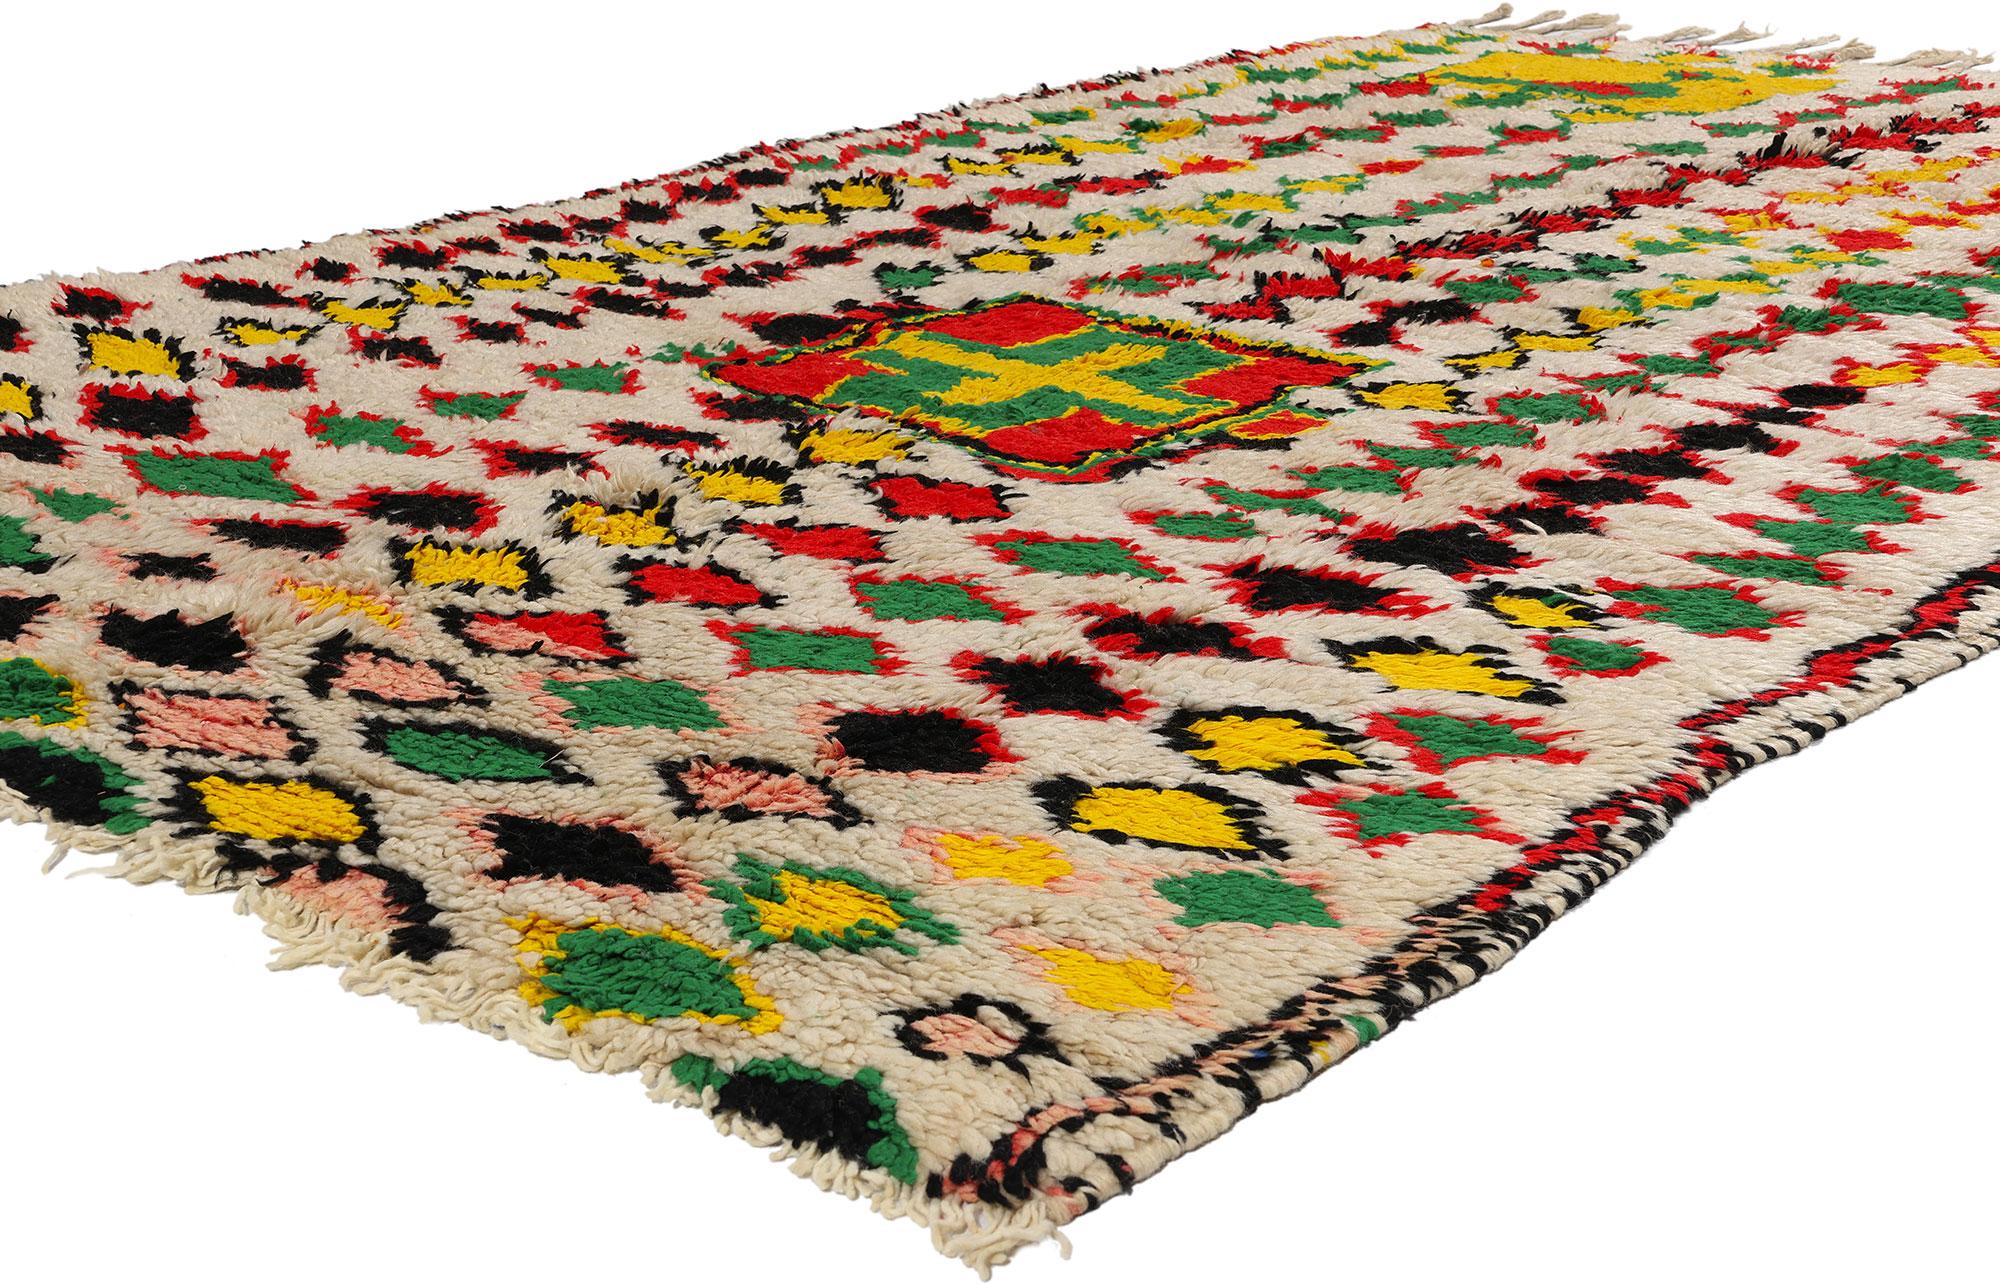 21785 Colorful Vintage Moroccan Azilal Rug, 05'04 x 08'07. Explore the storied legacy of Azilal rugs, resonating from the vibrant epicenter of the provincial capital in central Morocco, cradled within the majestic High Atlas Mountains. Revered for